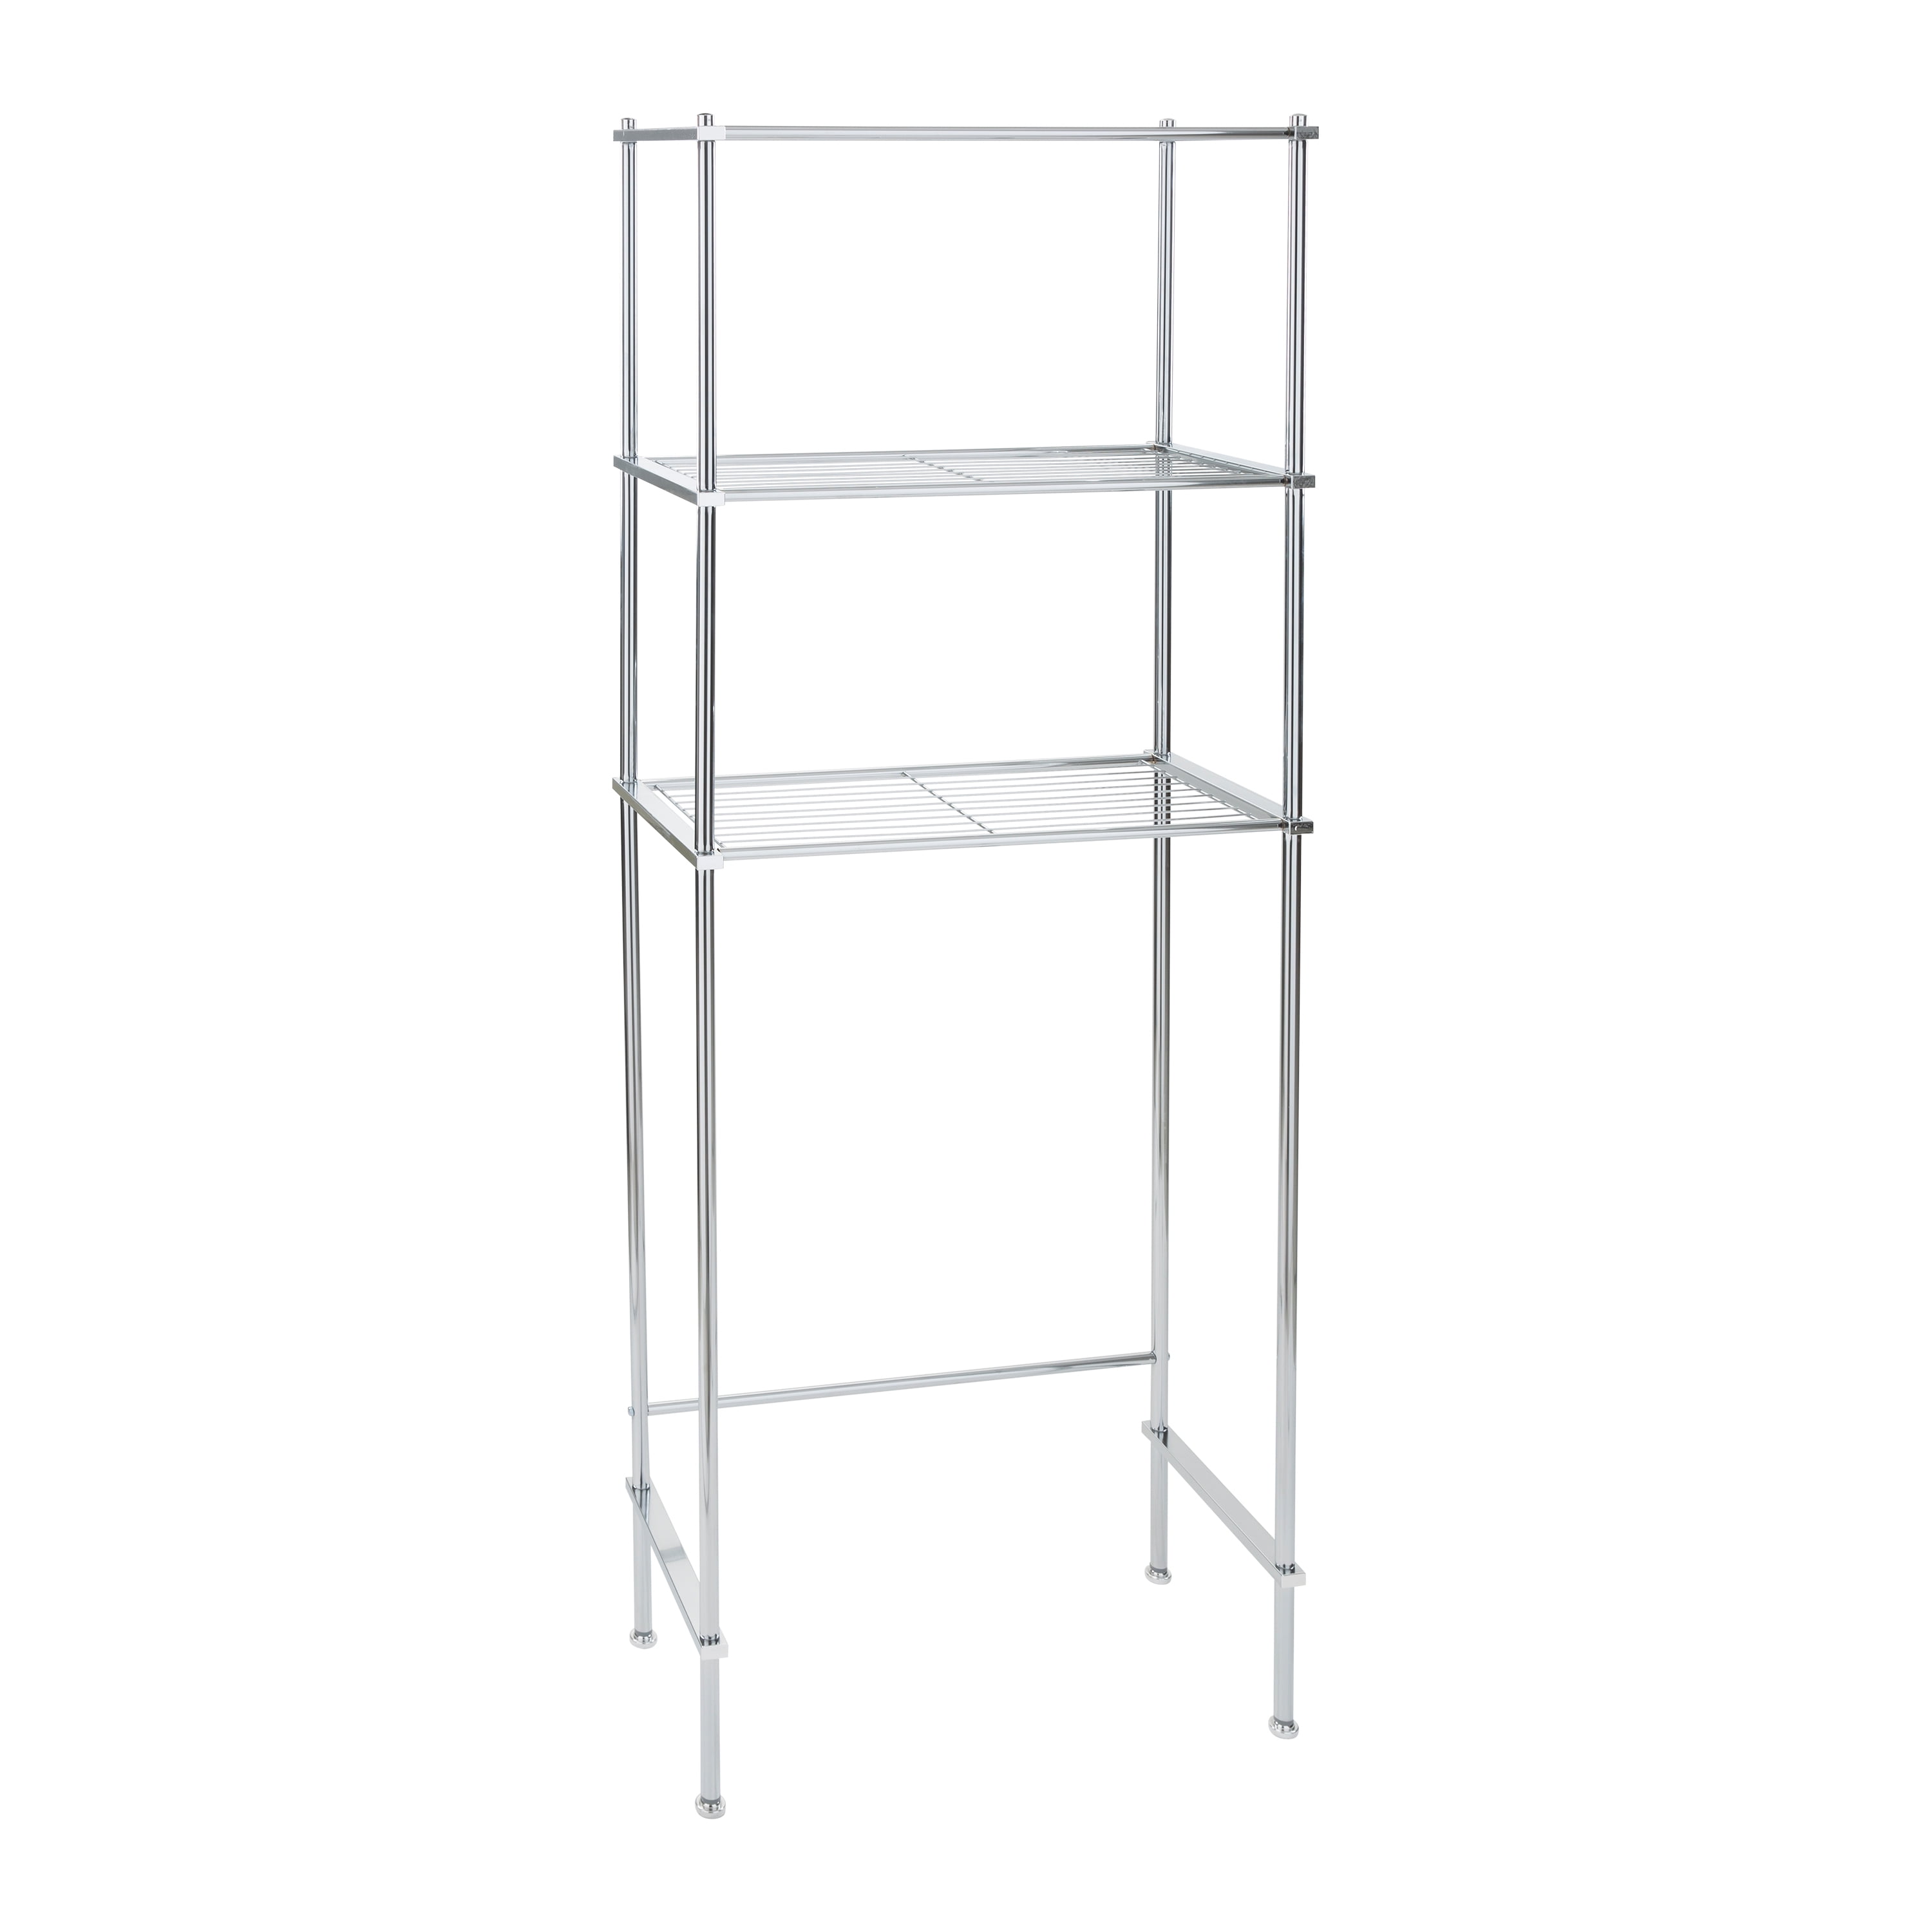  OYEAL Bathroom Shelves Freestanding Bathroom Towel Storage 4  Tier Wire Shelving Unit with Guard Bathroom Shelf Organizer Standing for  Pantry Kitchen Laundry Room Organization, Black : Home & Kitchen